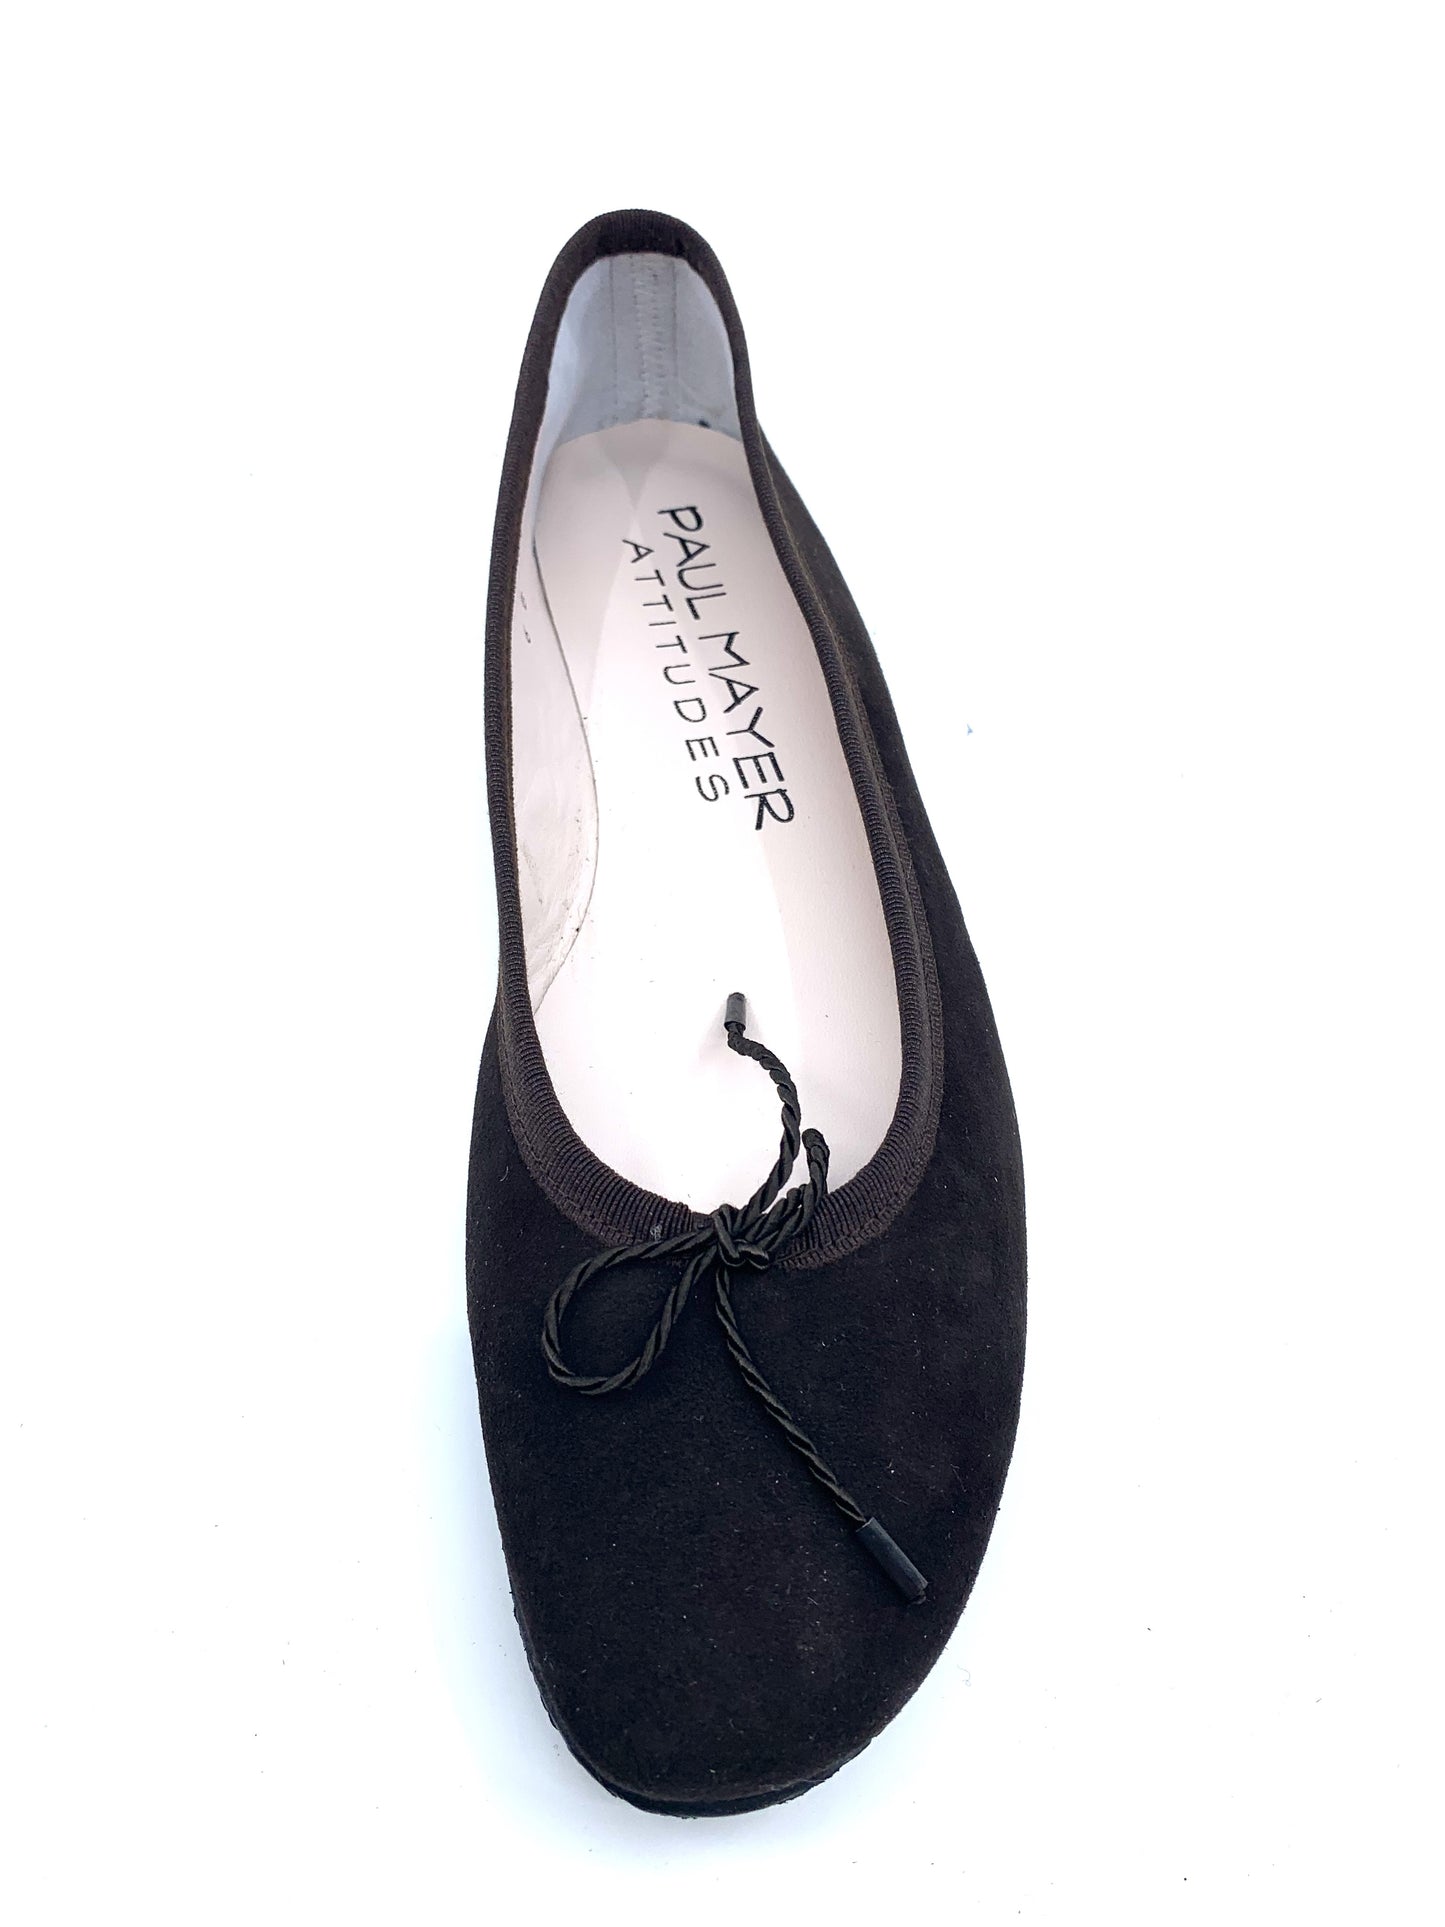 Country Brown Suede Niger Paul Mayer Ballet Flats